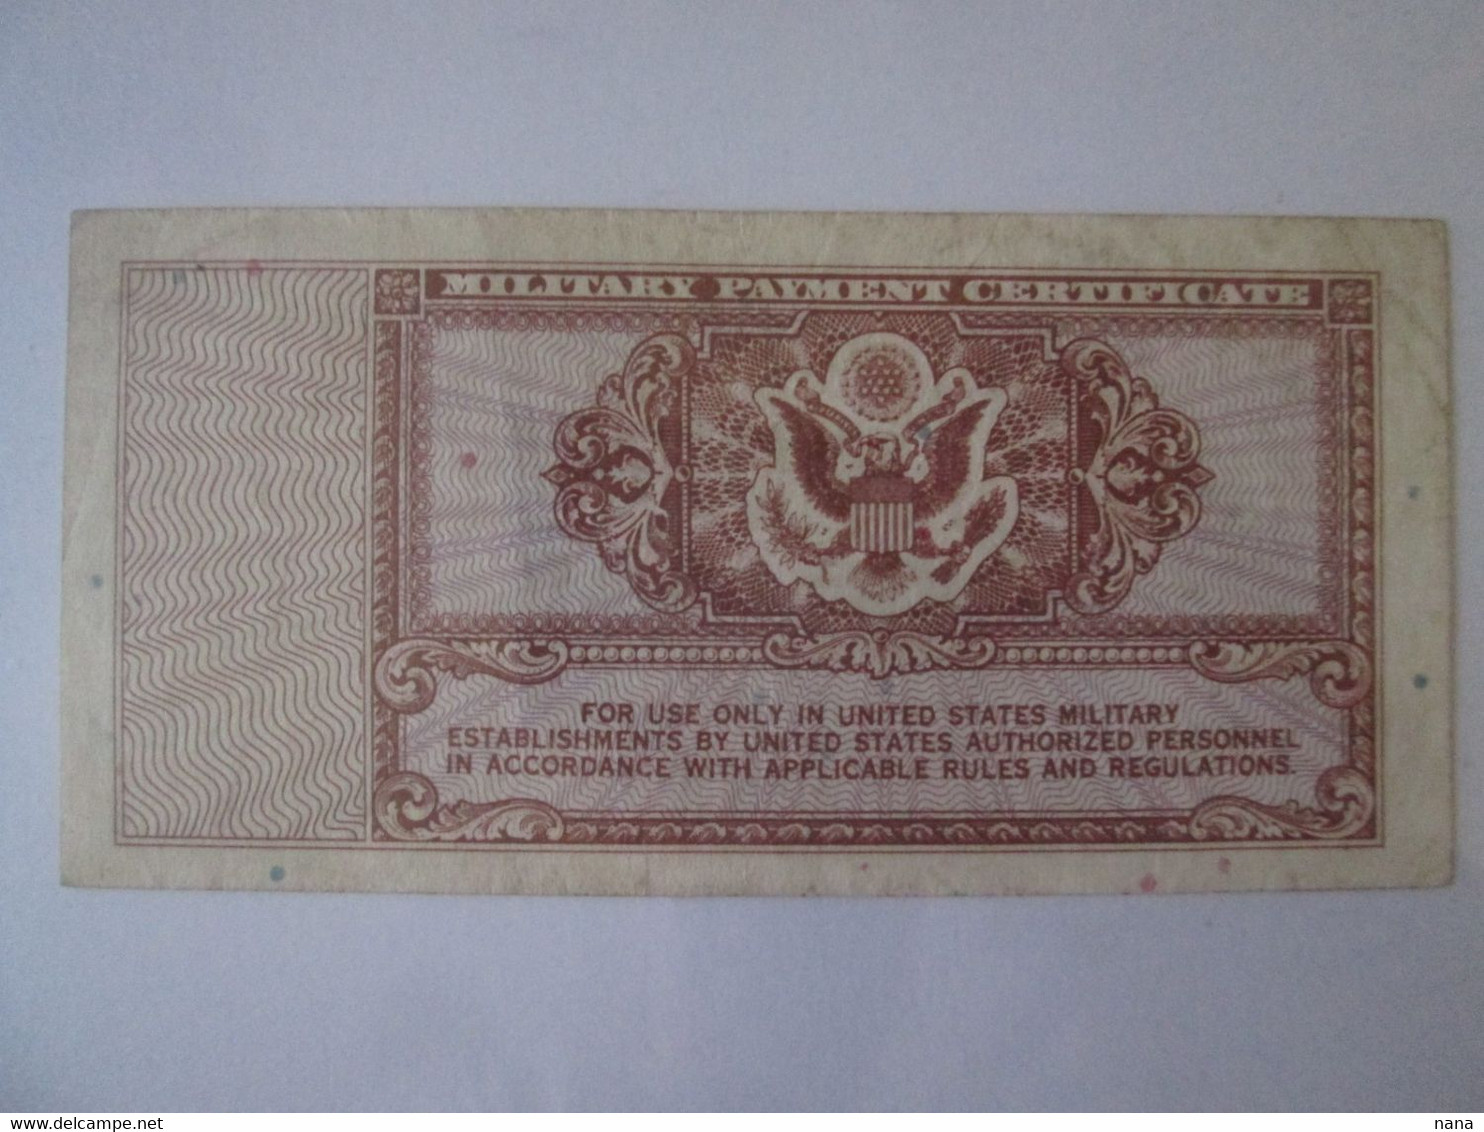 United States 5 Cents 1948-1951 Military Payment Certificate Banknote,see Pictures - 1948-1951 - Series 472